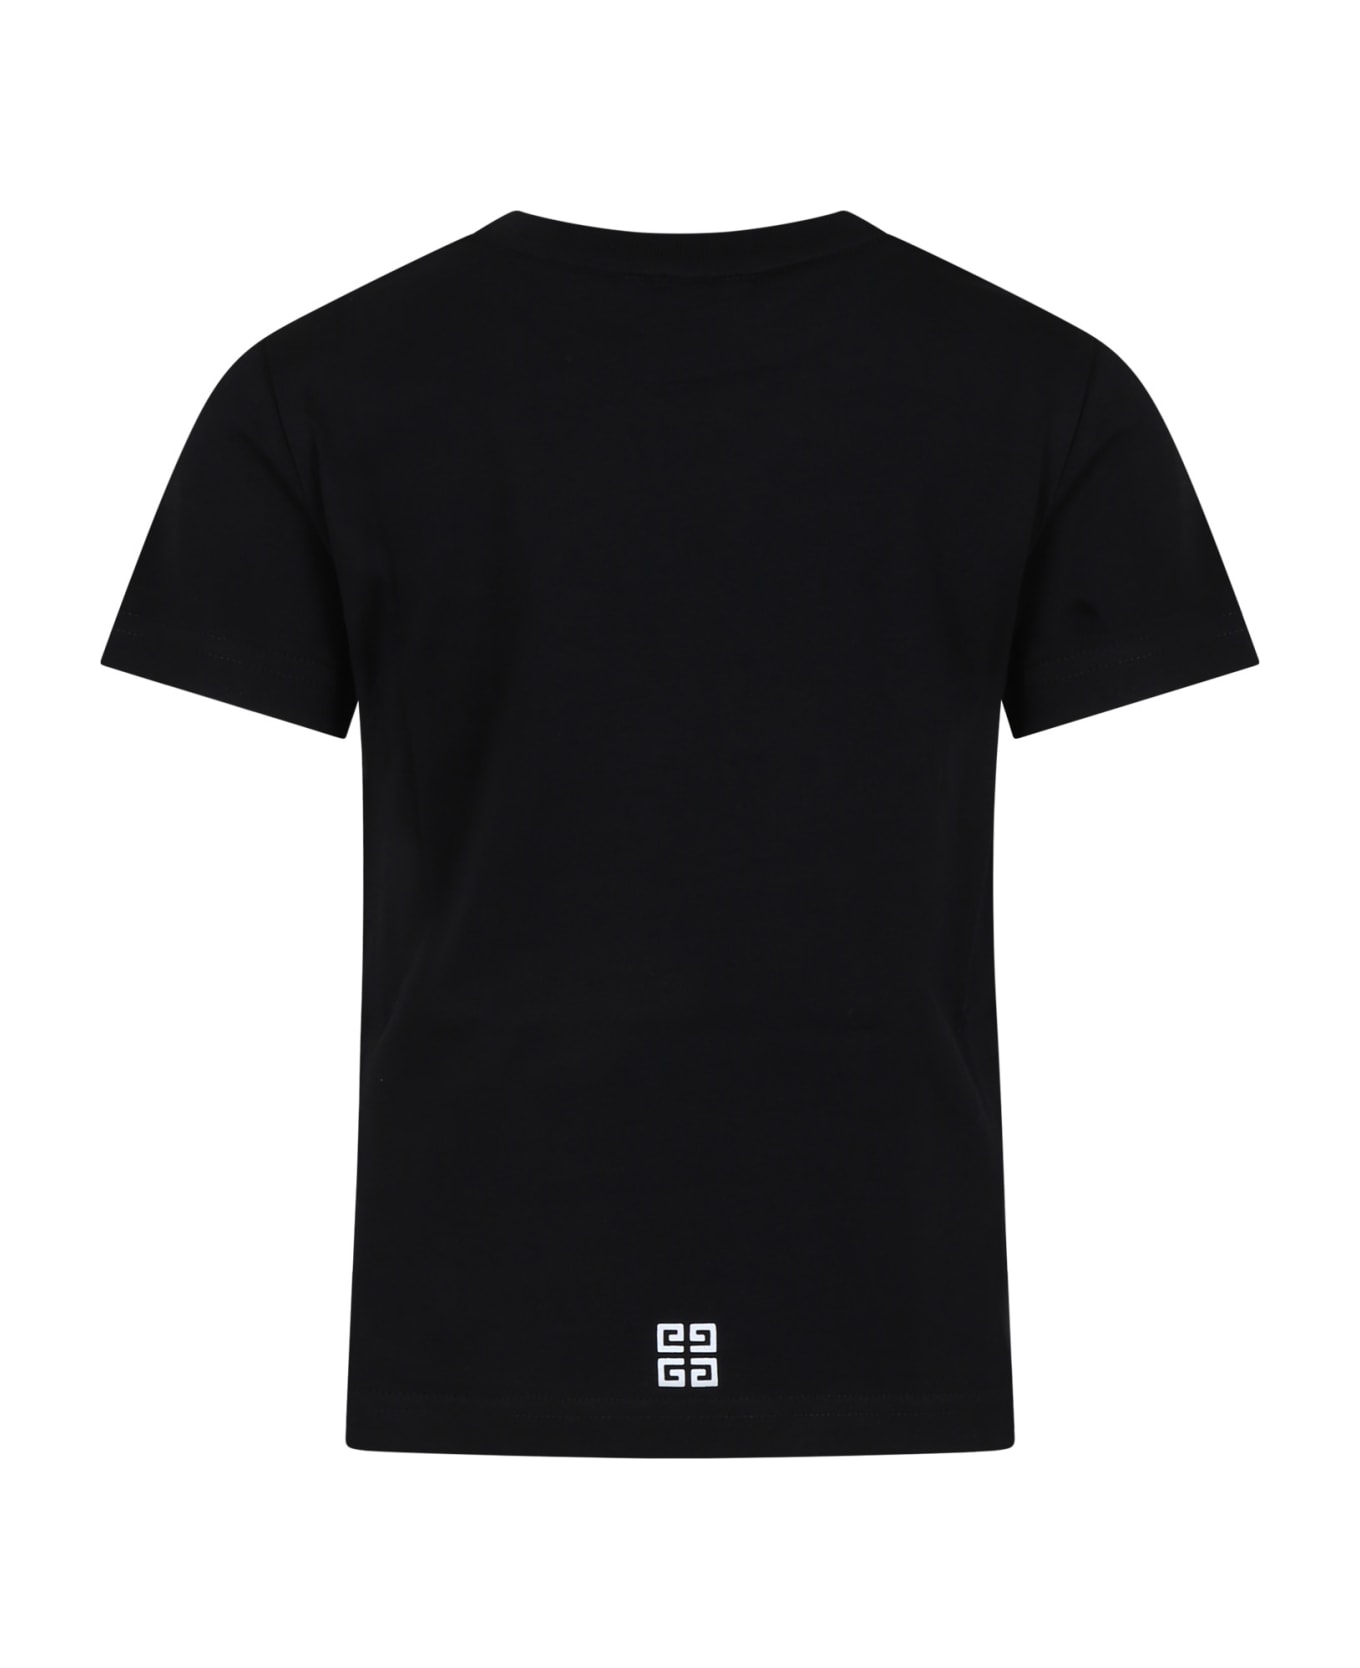 Givenchy Black T-shirt For Boy With Logo - Nero